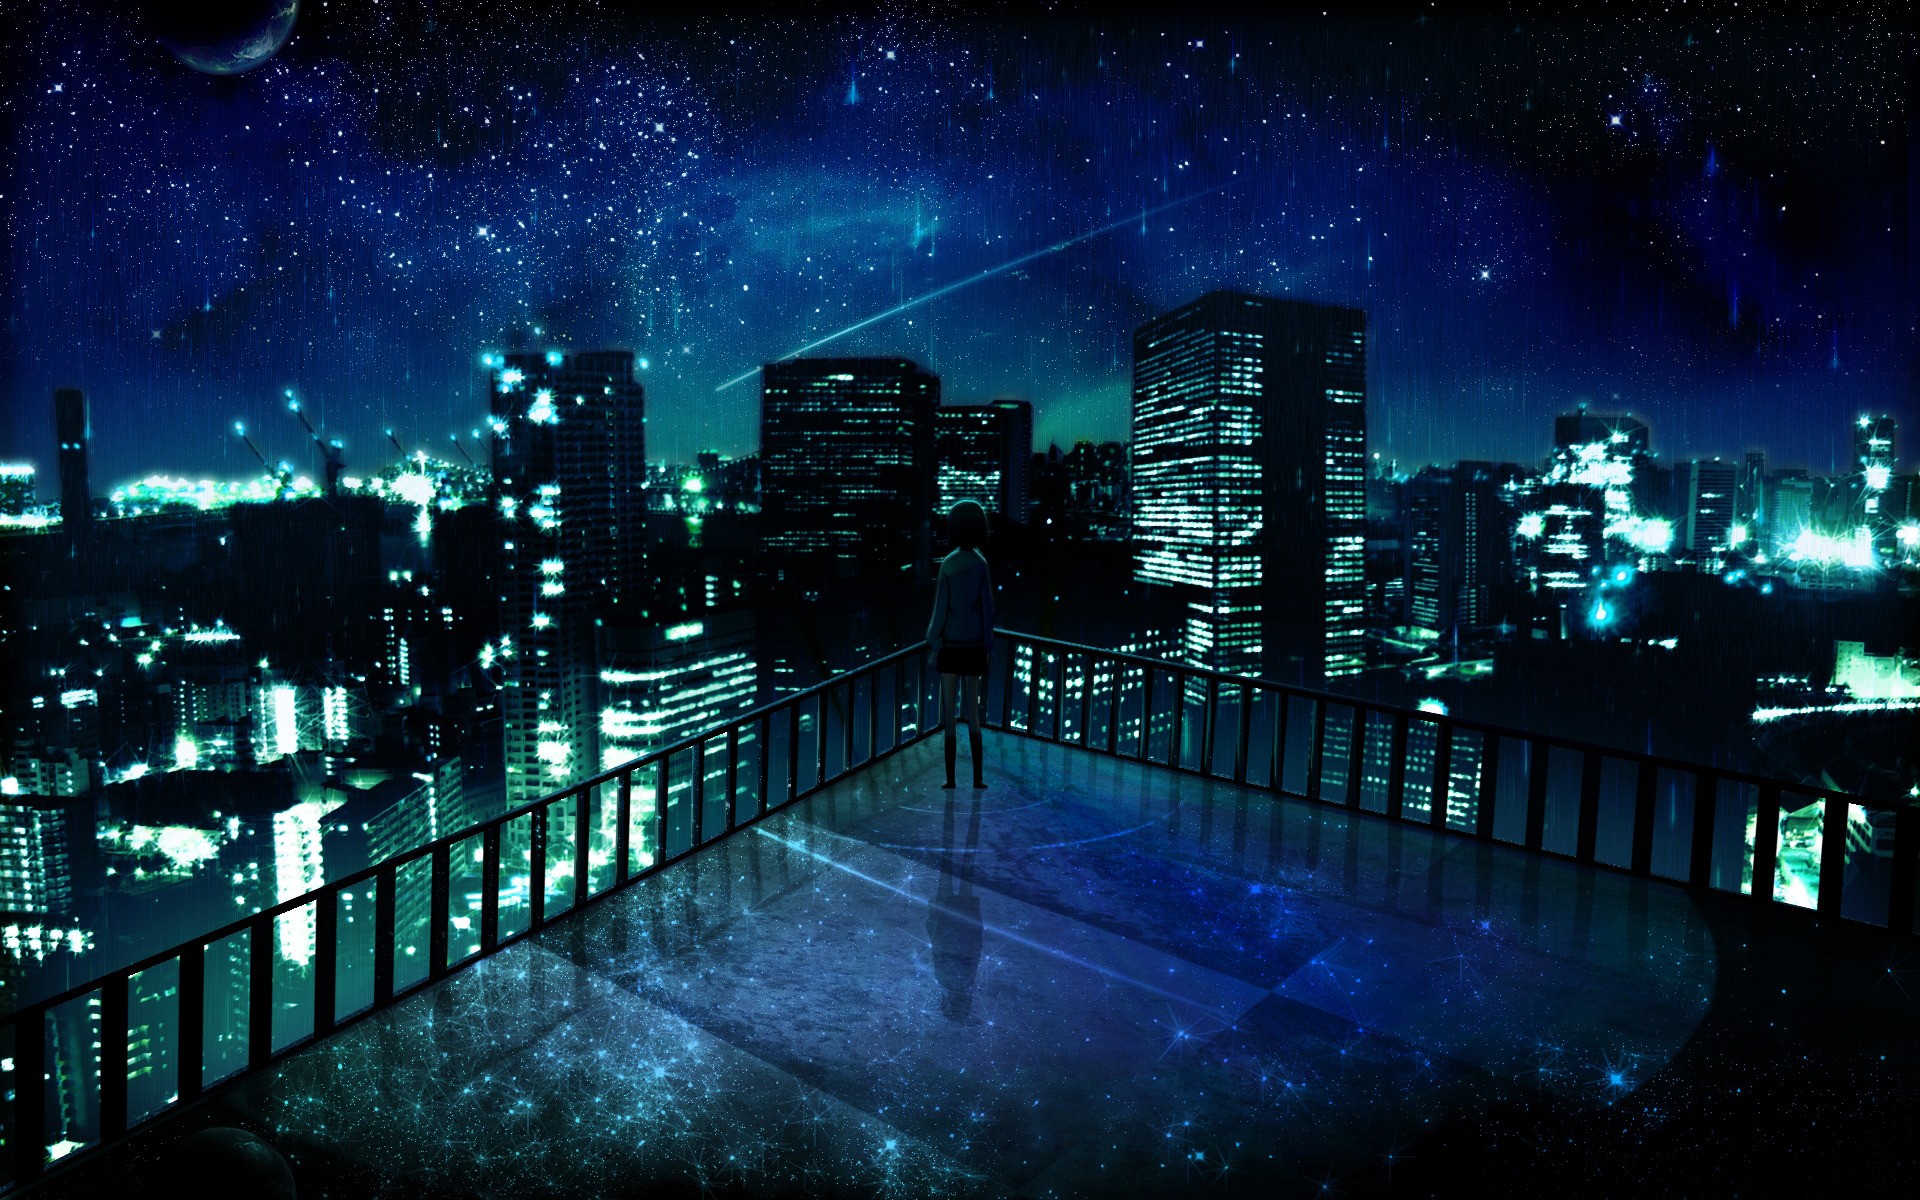 outer space, cityscapes, night, stars, balcony, buildings, lonely, city lights, artwork, manga, night landscapes - desktop wallpaper